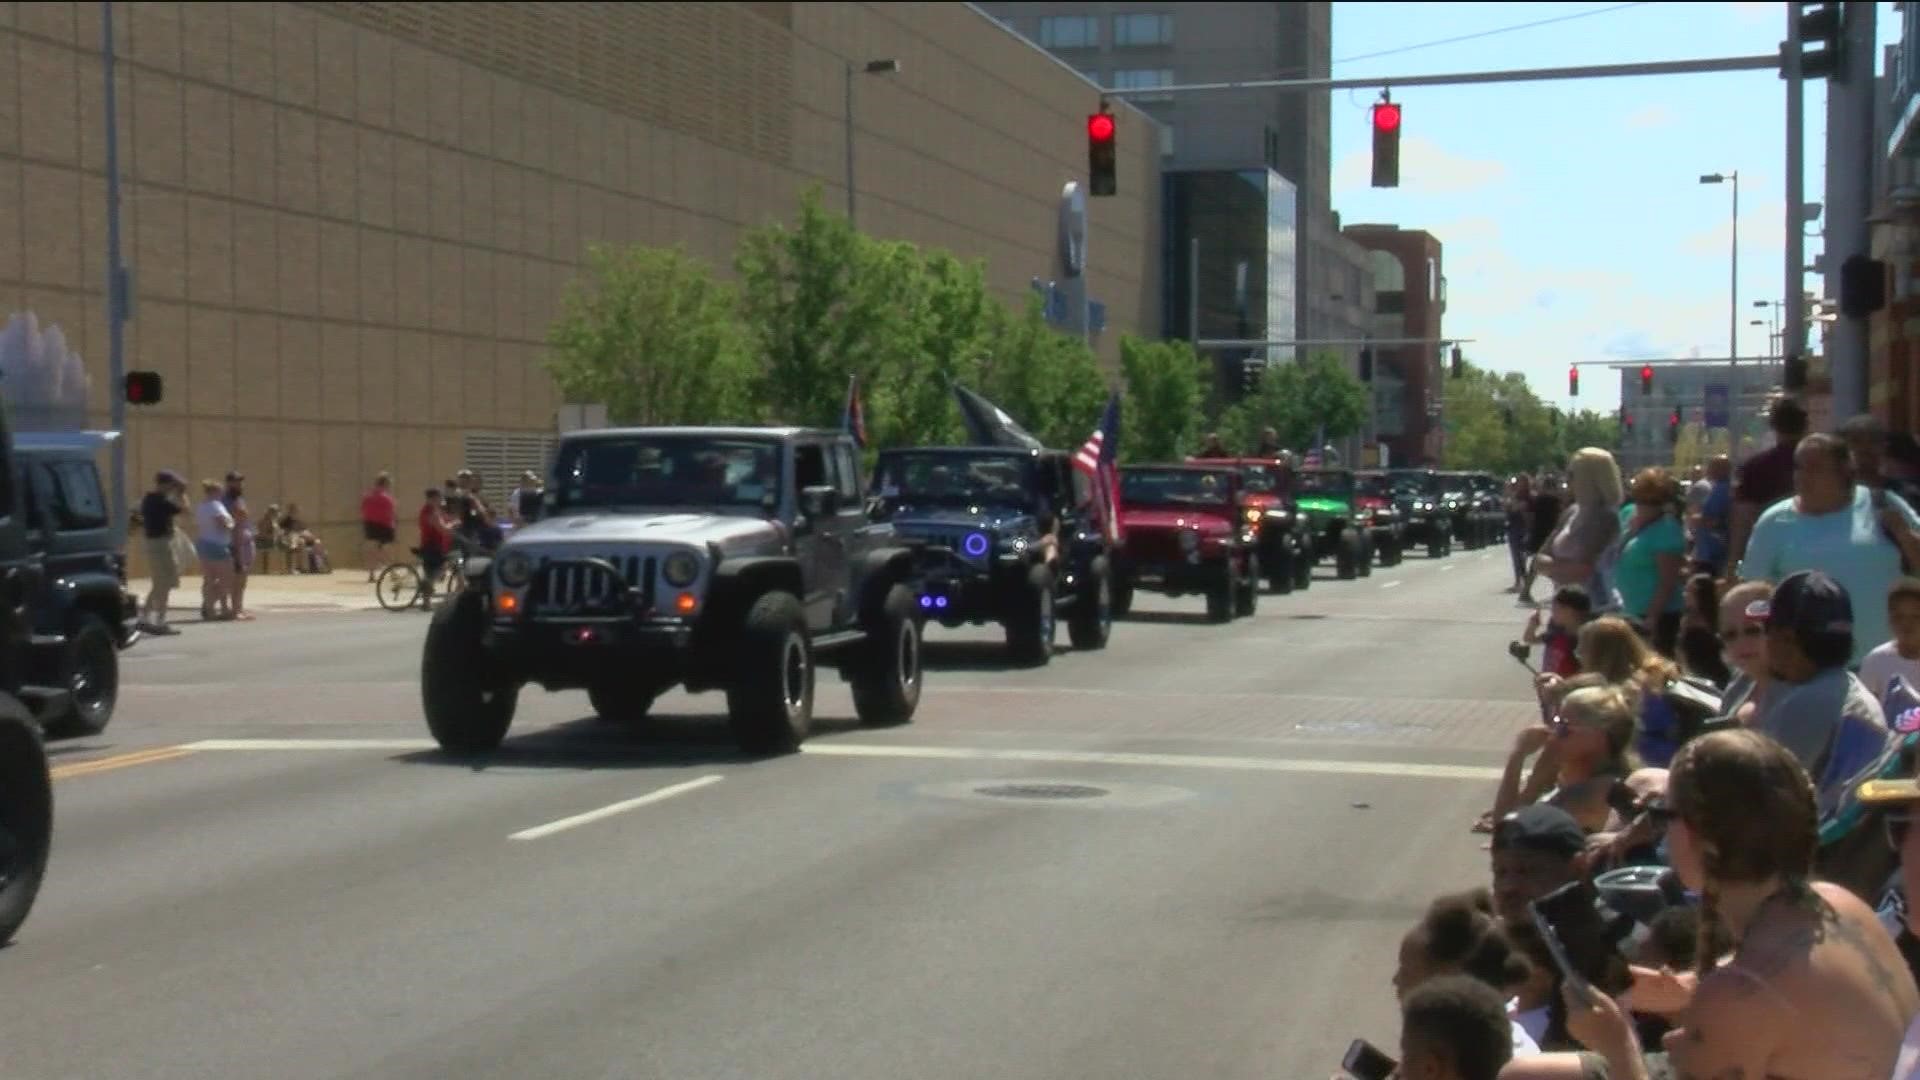 Toledo is preparing for fifth Jeep Fest Aug. 12-14.